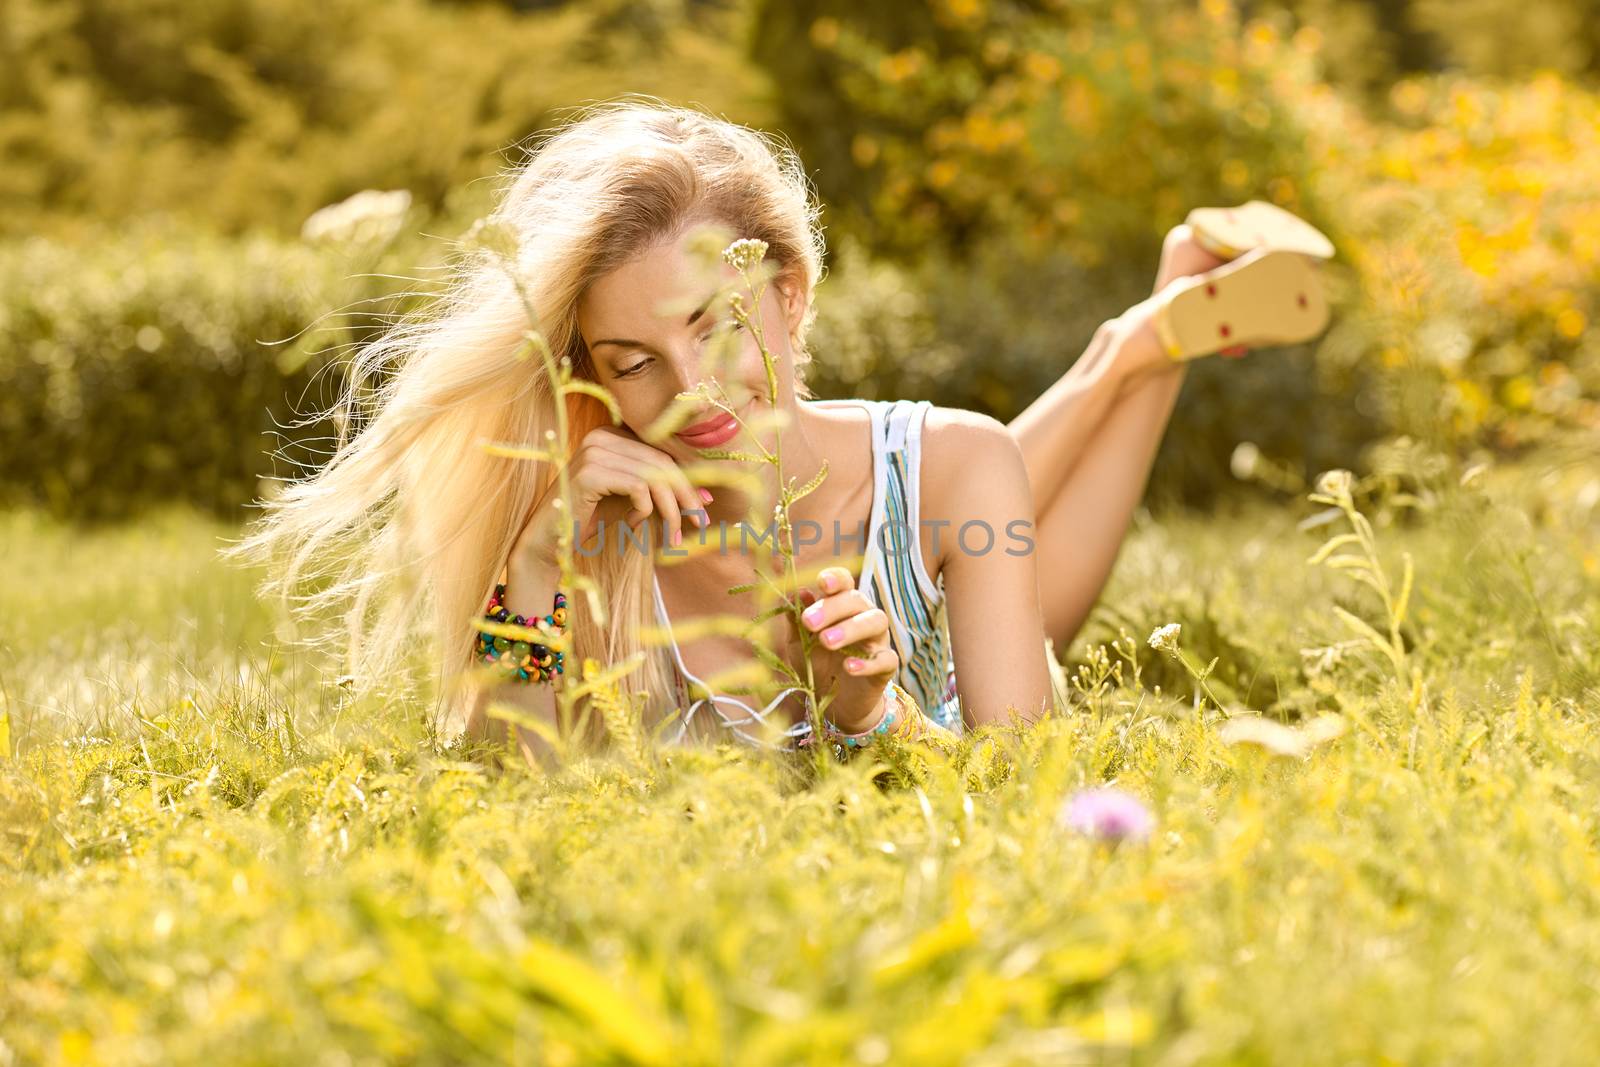 Beauty playful woman relax in summer garden dreaming on grass, people, outdoors, bokeh. Attractive happy blonde girl enjoying nature, harmony on meadow, lifestyle.Sunny day, forest, flowers, copyspace